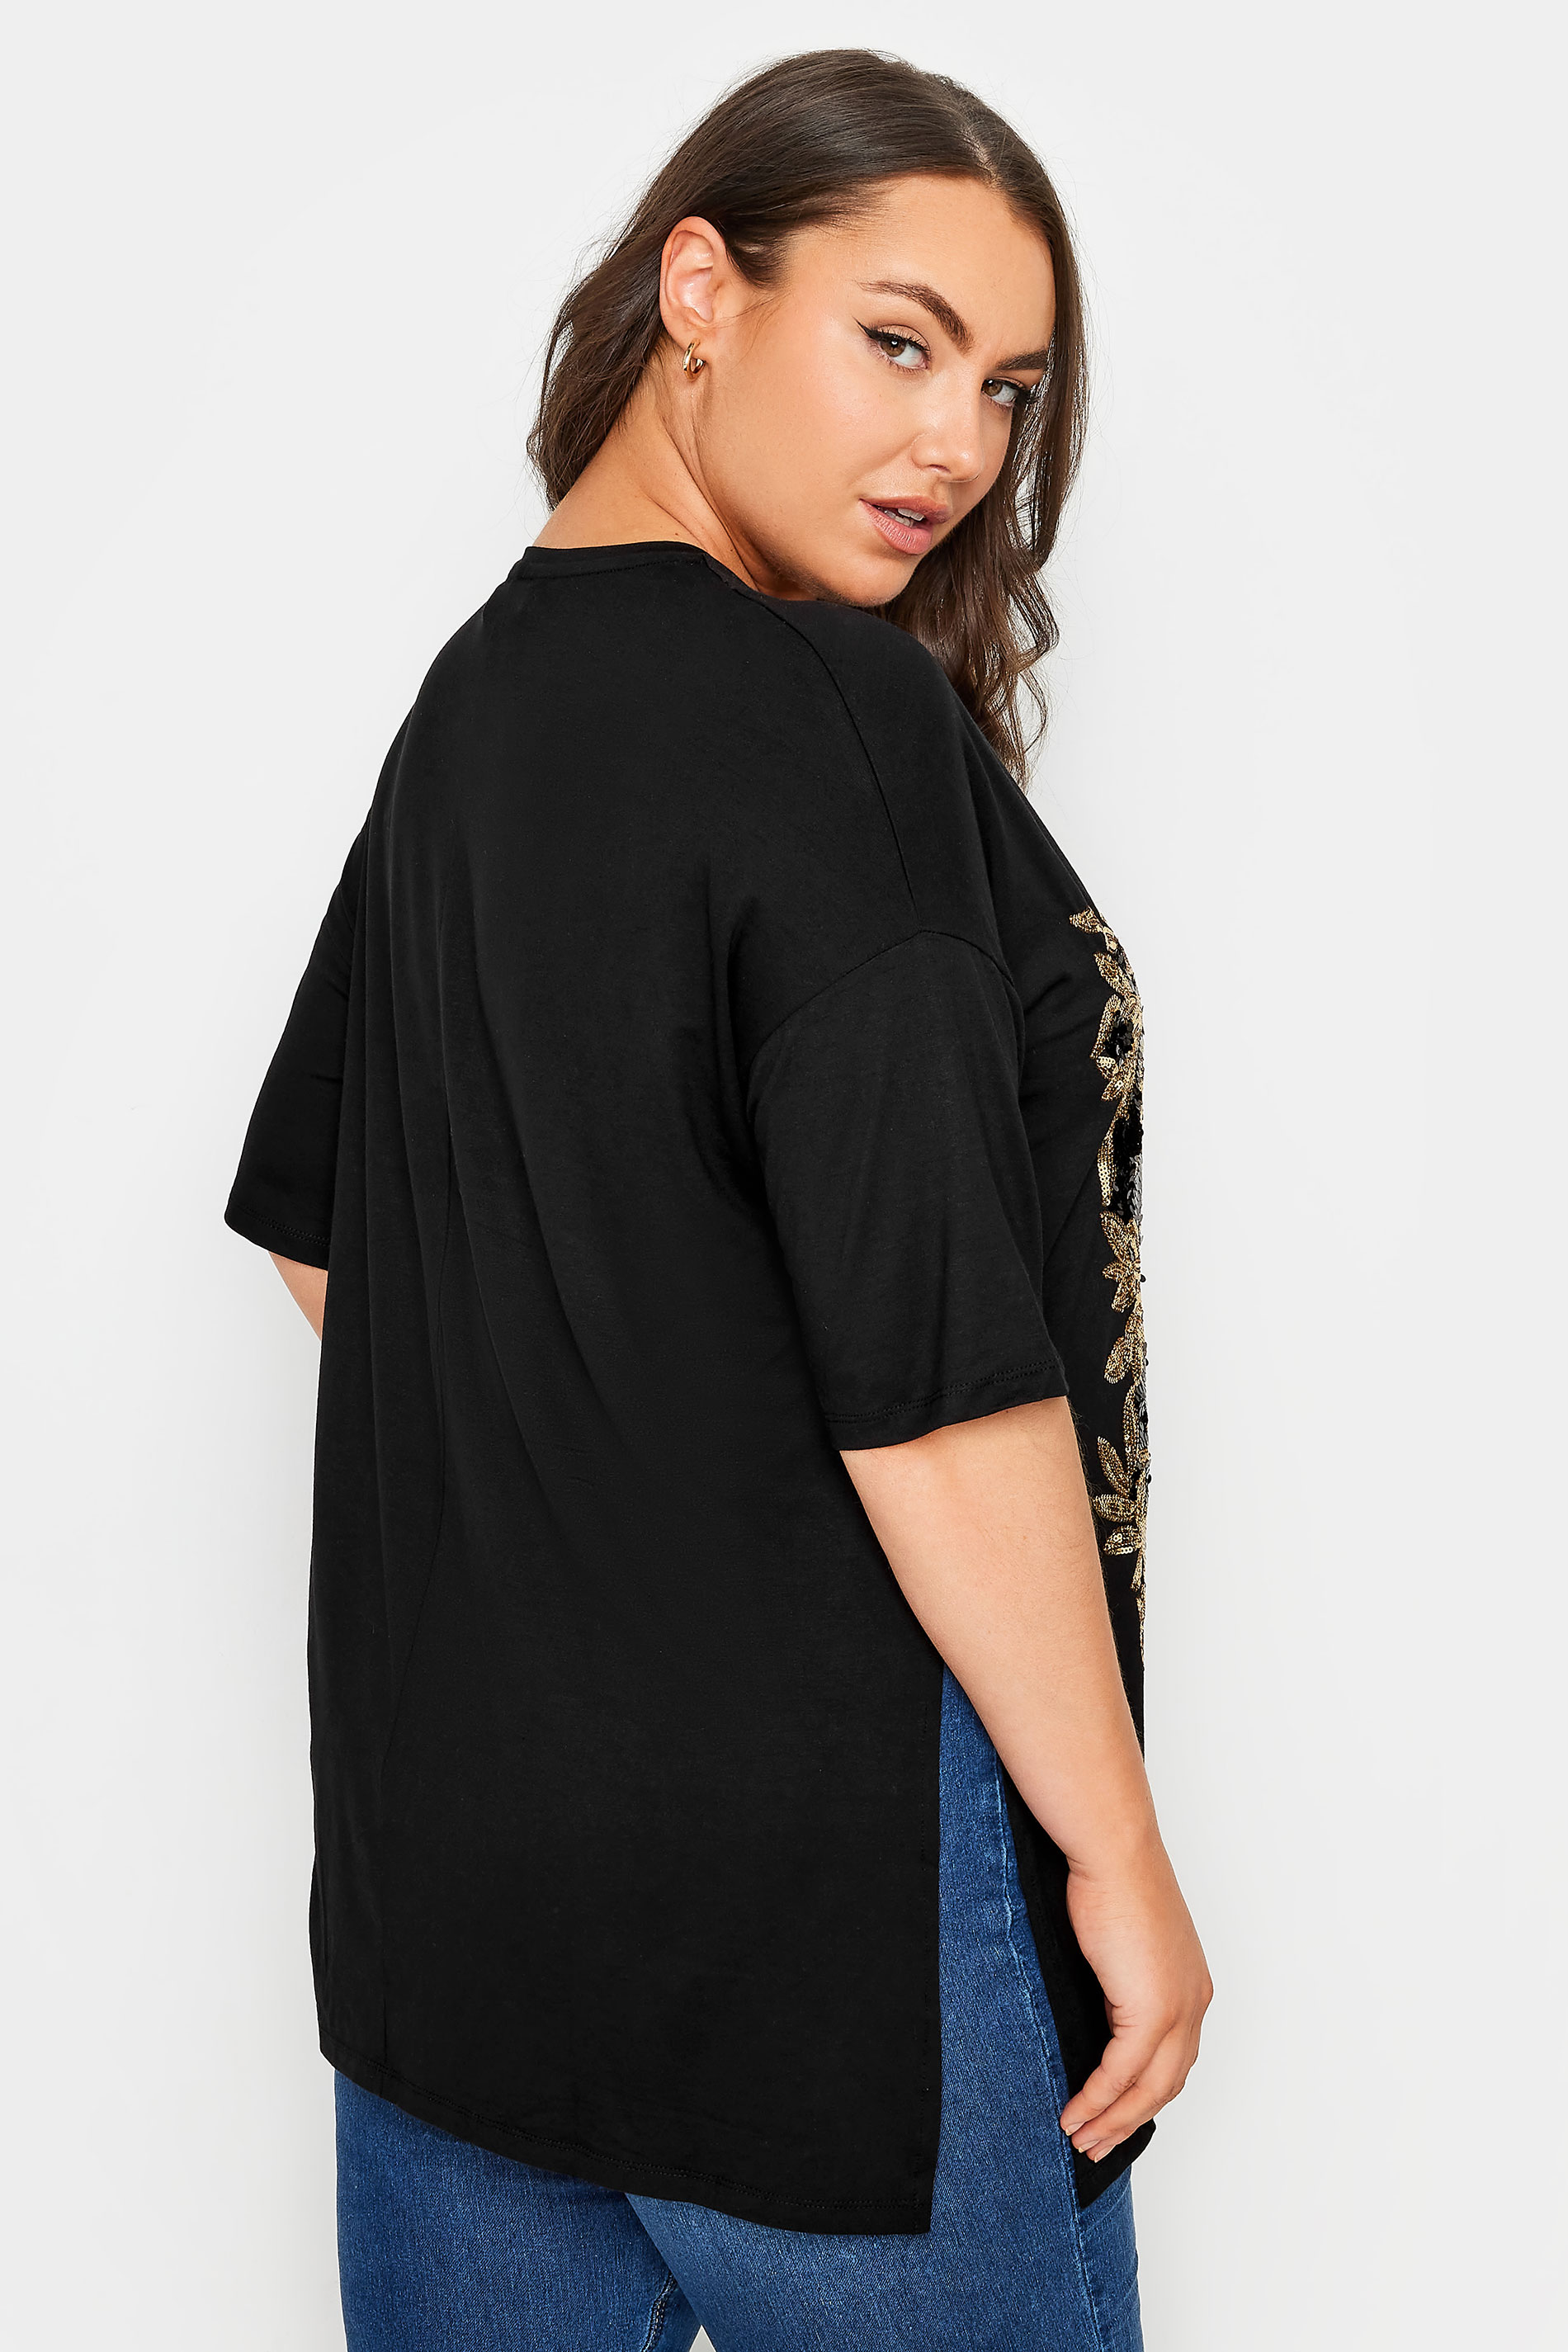 YOURS Plus Size Black Sequin Embellished Design T-Shirt | Yours Clothing 3